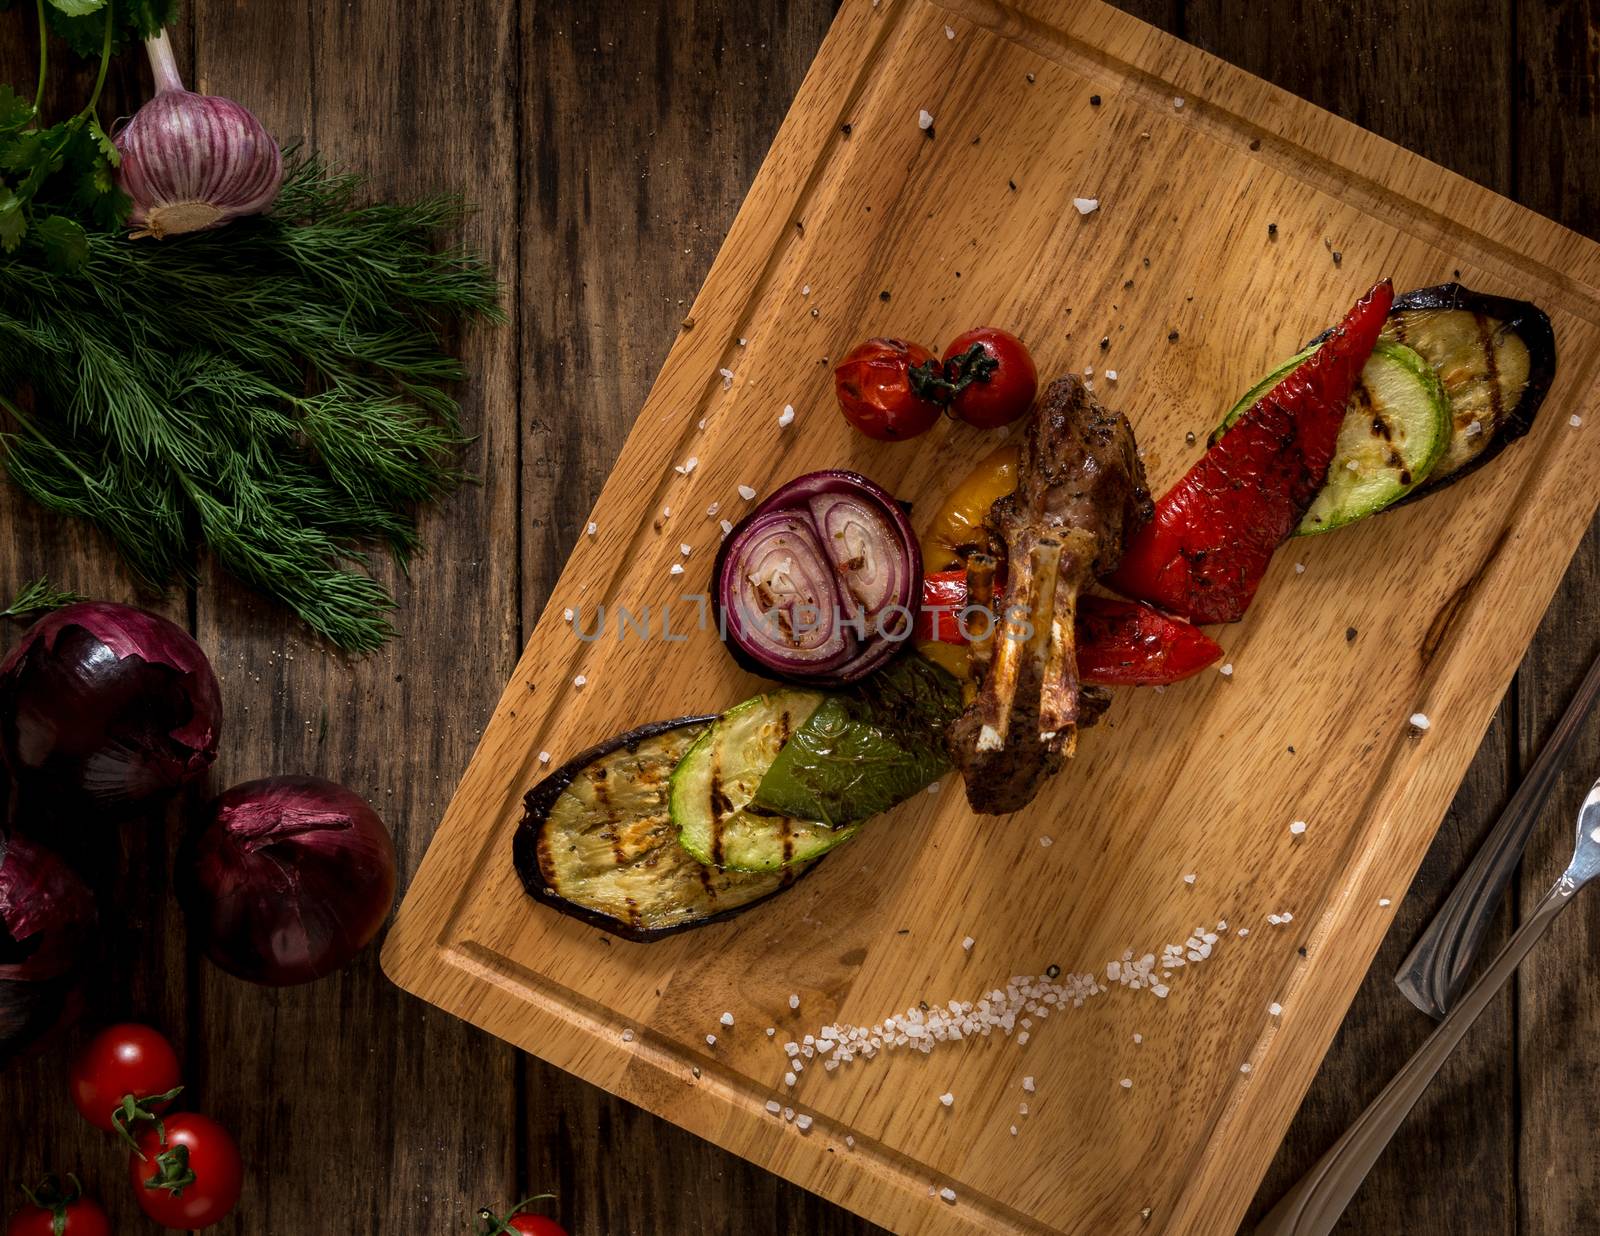 dish on a wooden surface by A_Karim